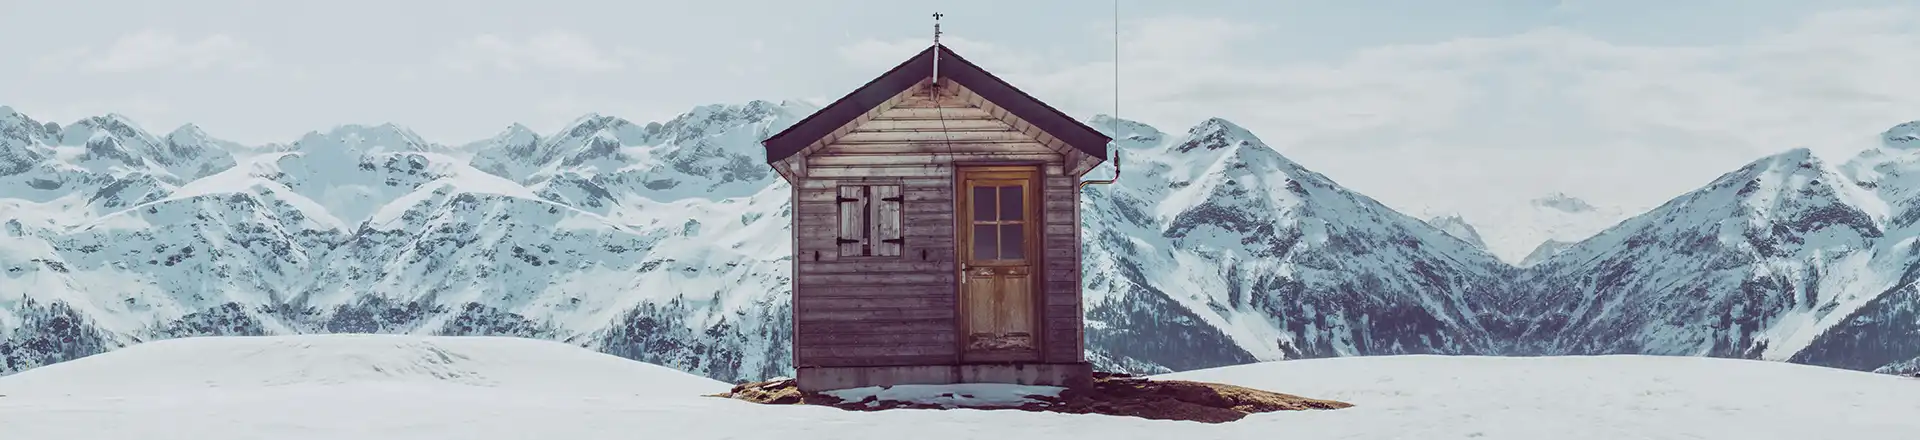 tiny home in snow covered mountains